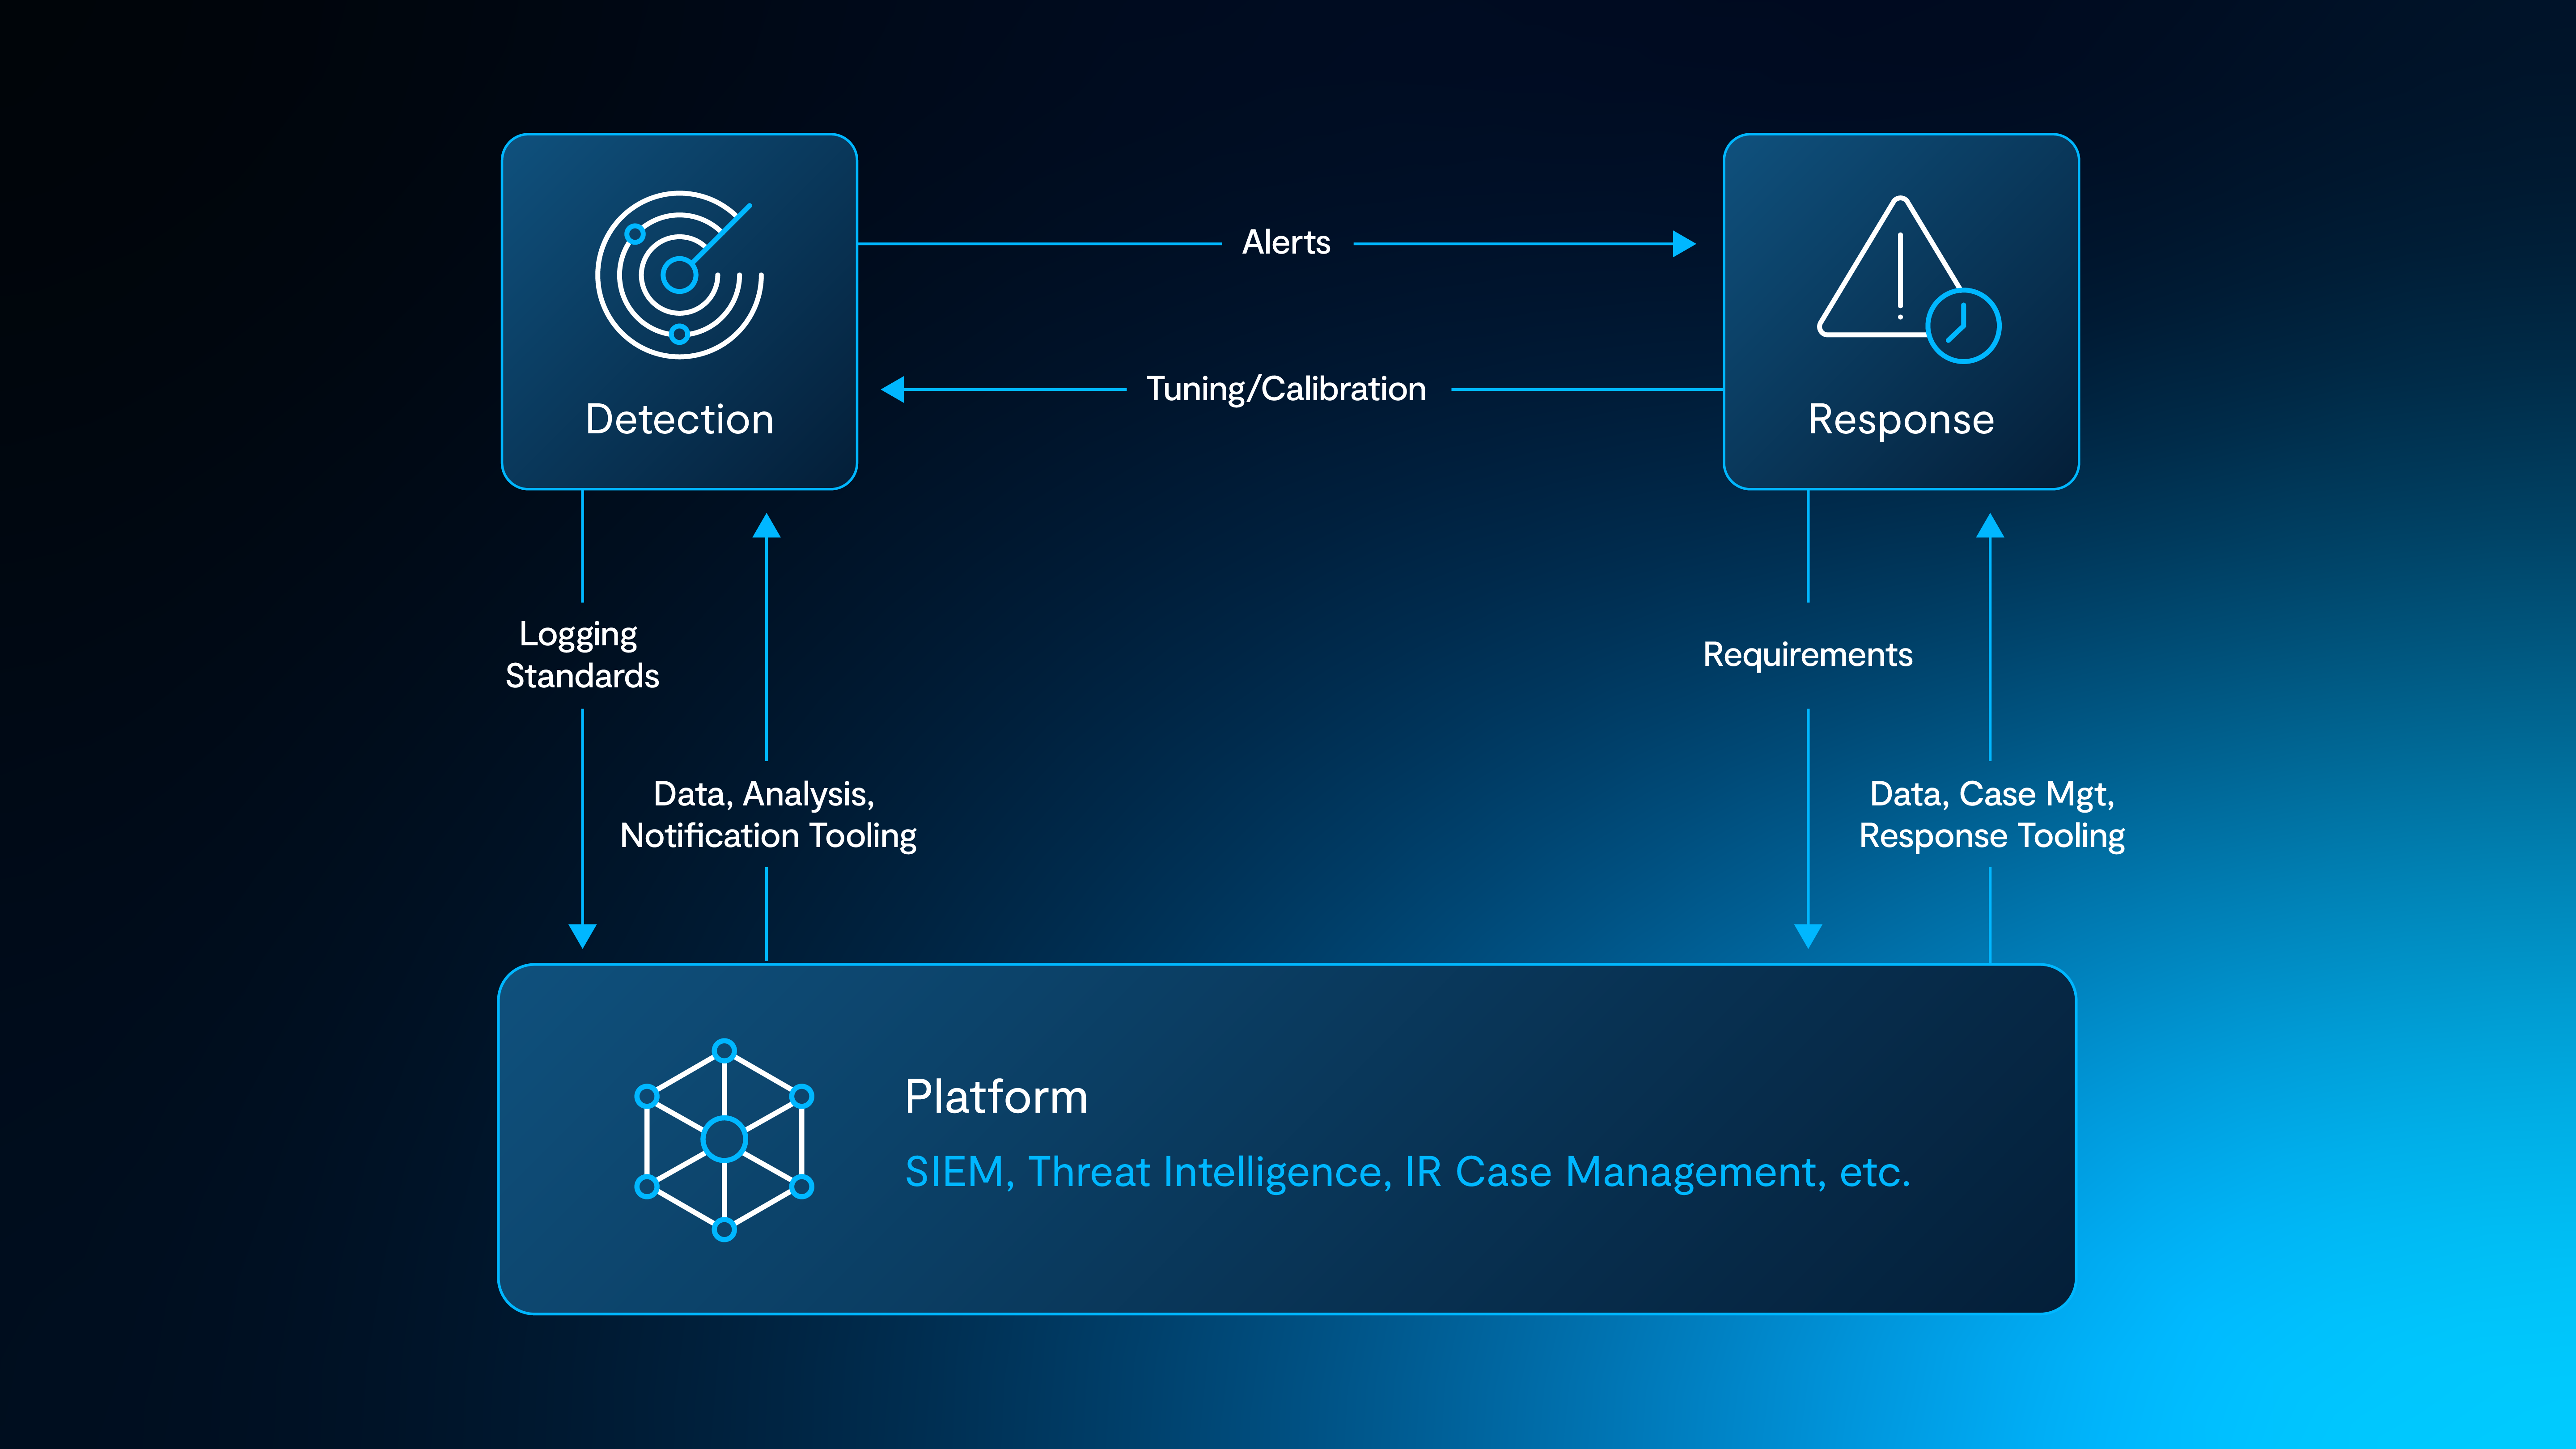 Diagram showing feedback loops of Alerts and Tuning between Detection and Response; Requirements and Data between Response and Platform; and Logging Standards and Data between Detection and Platform